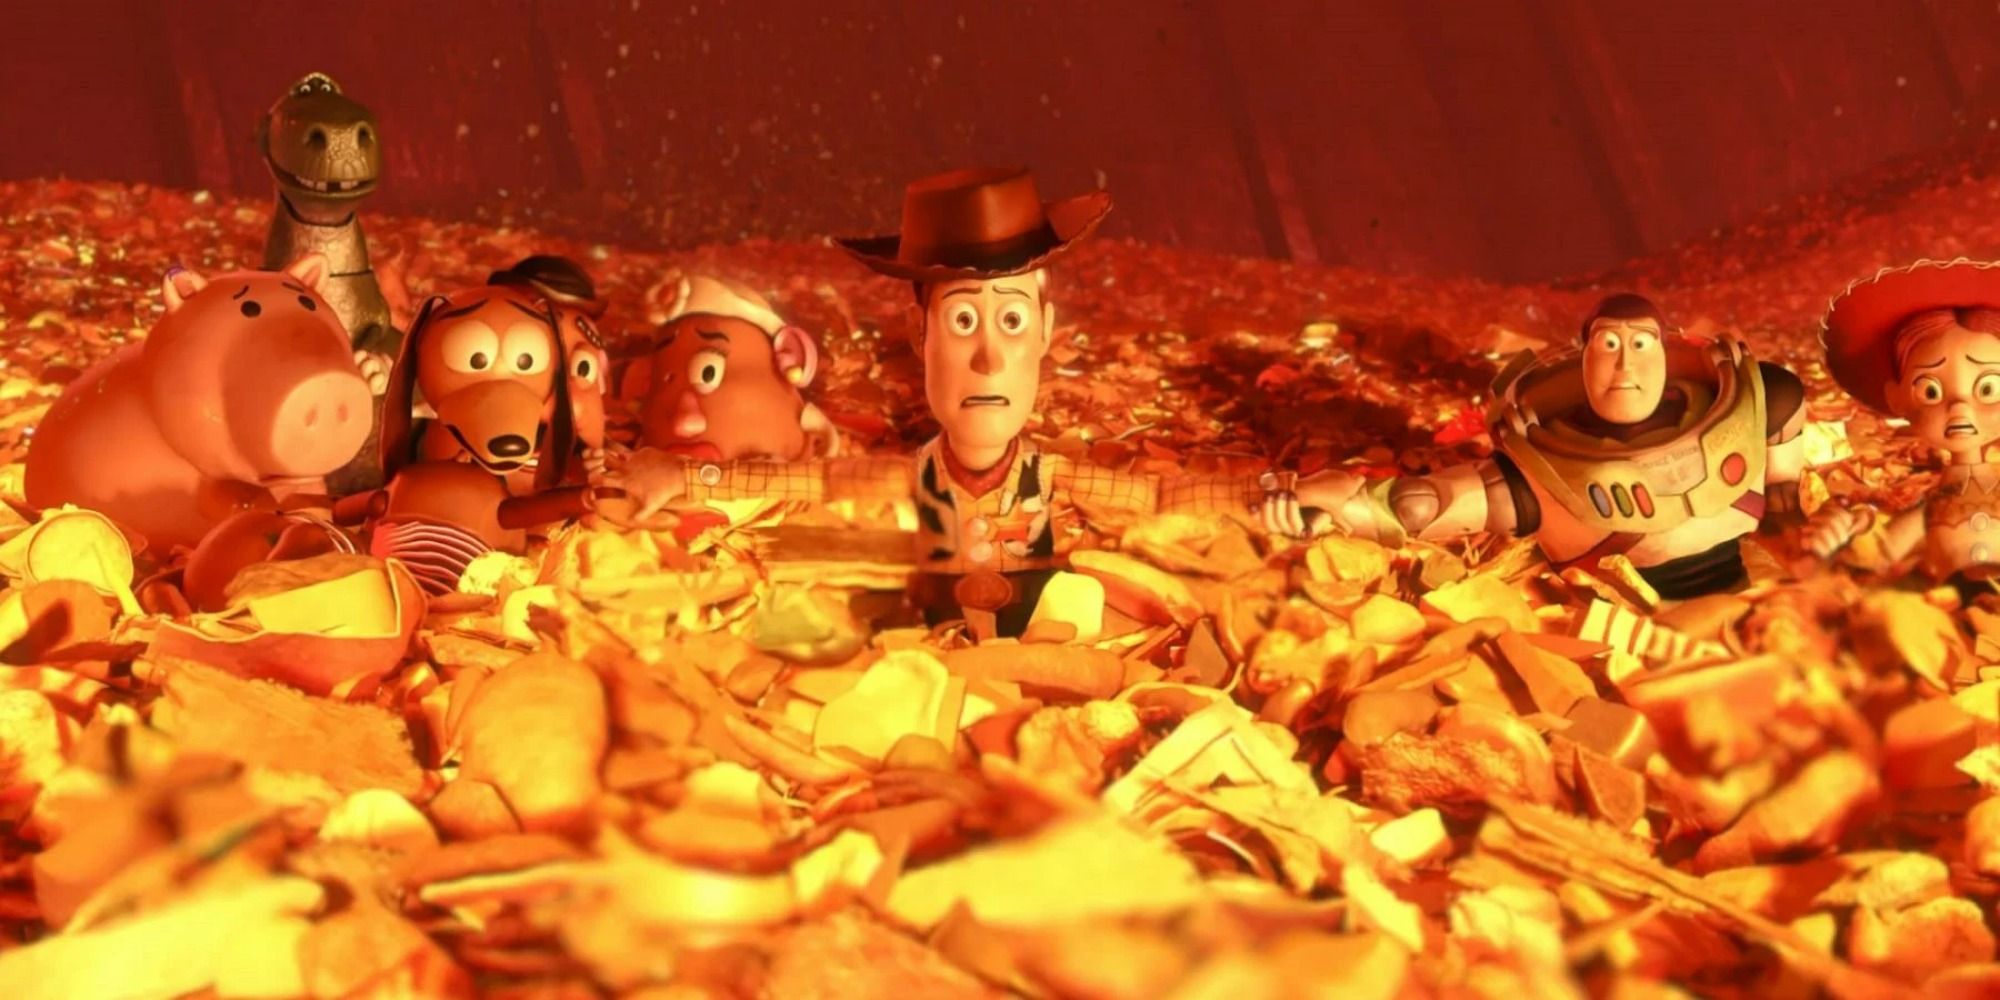 Scene in Toy Story 3 with Woody voiced by Tom Hanks, Buzz Lightyear voiced by Tim Allen as they sit in the trash about to be incinerated.